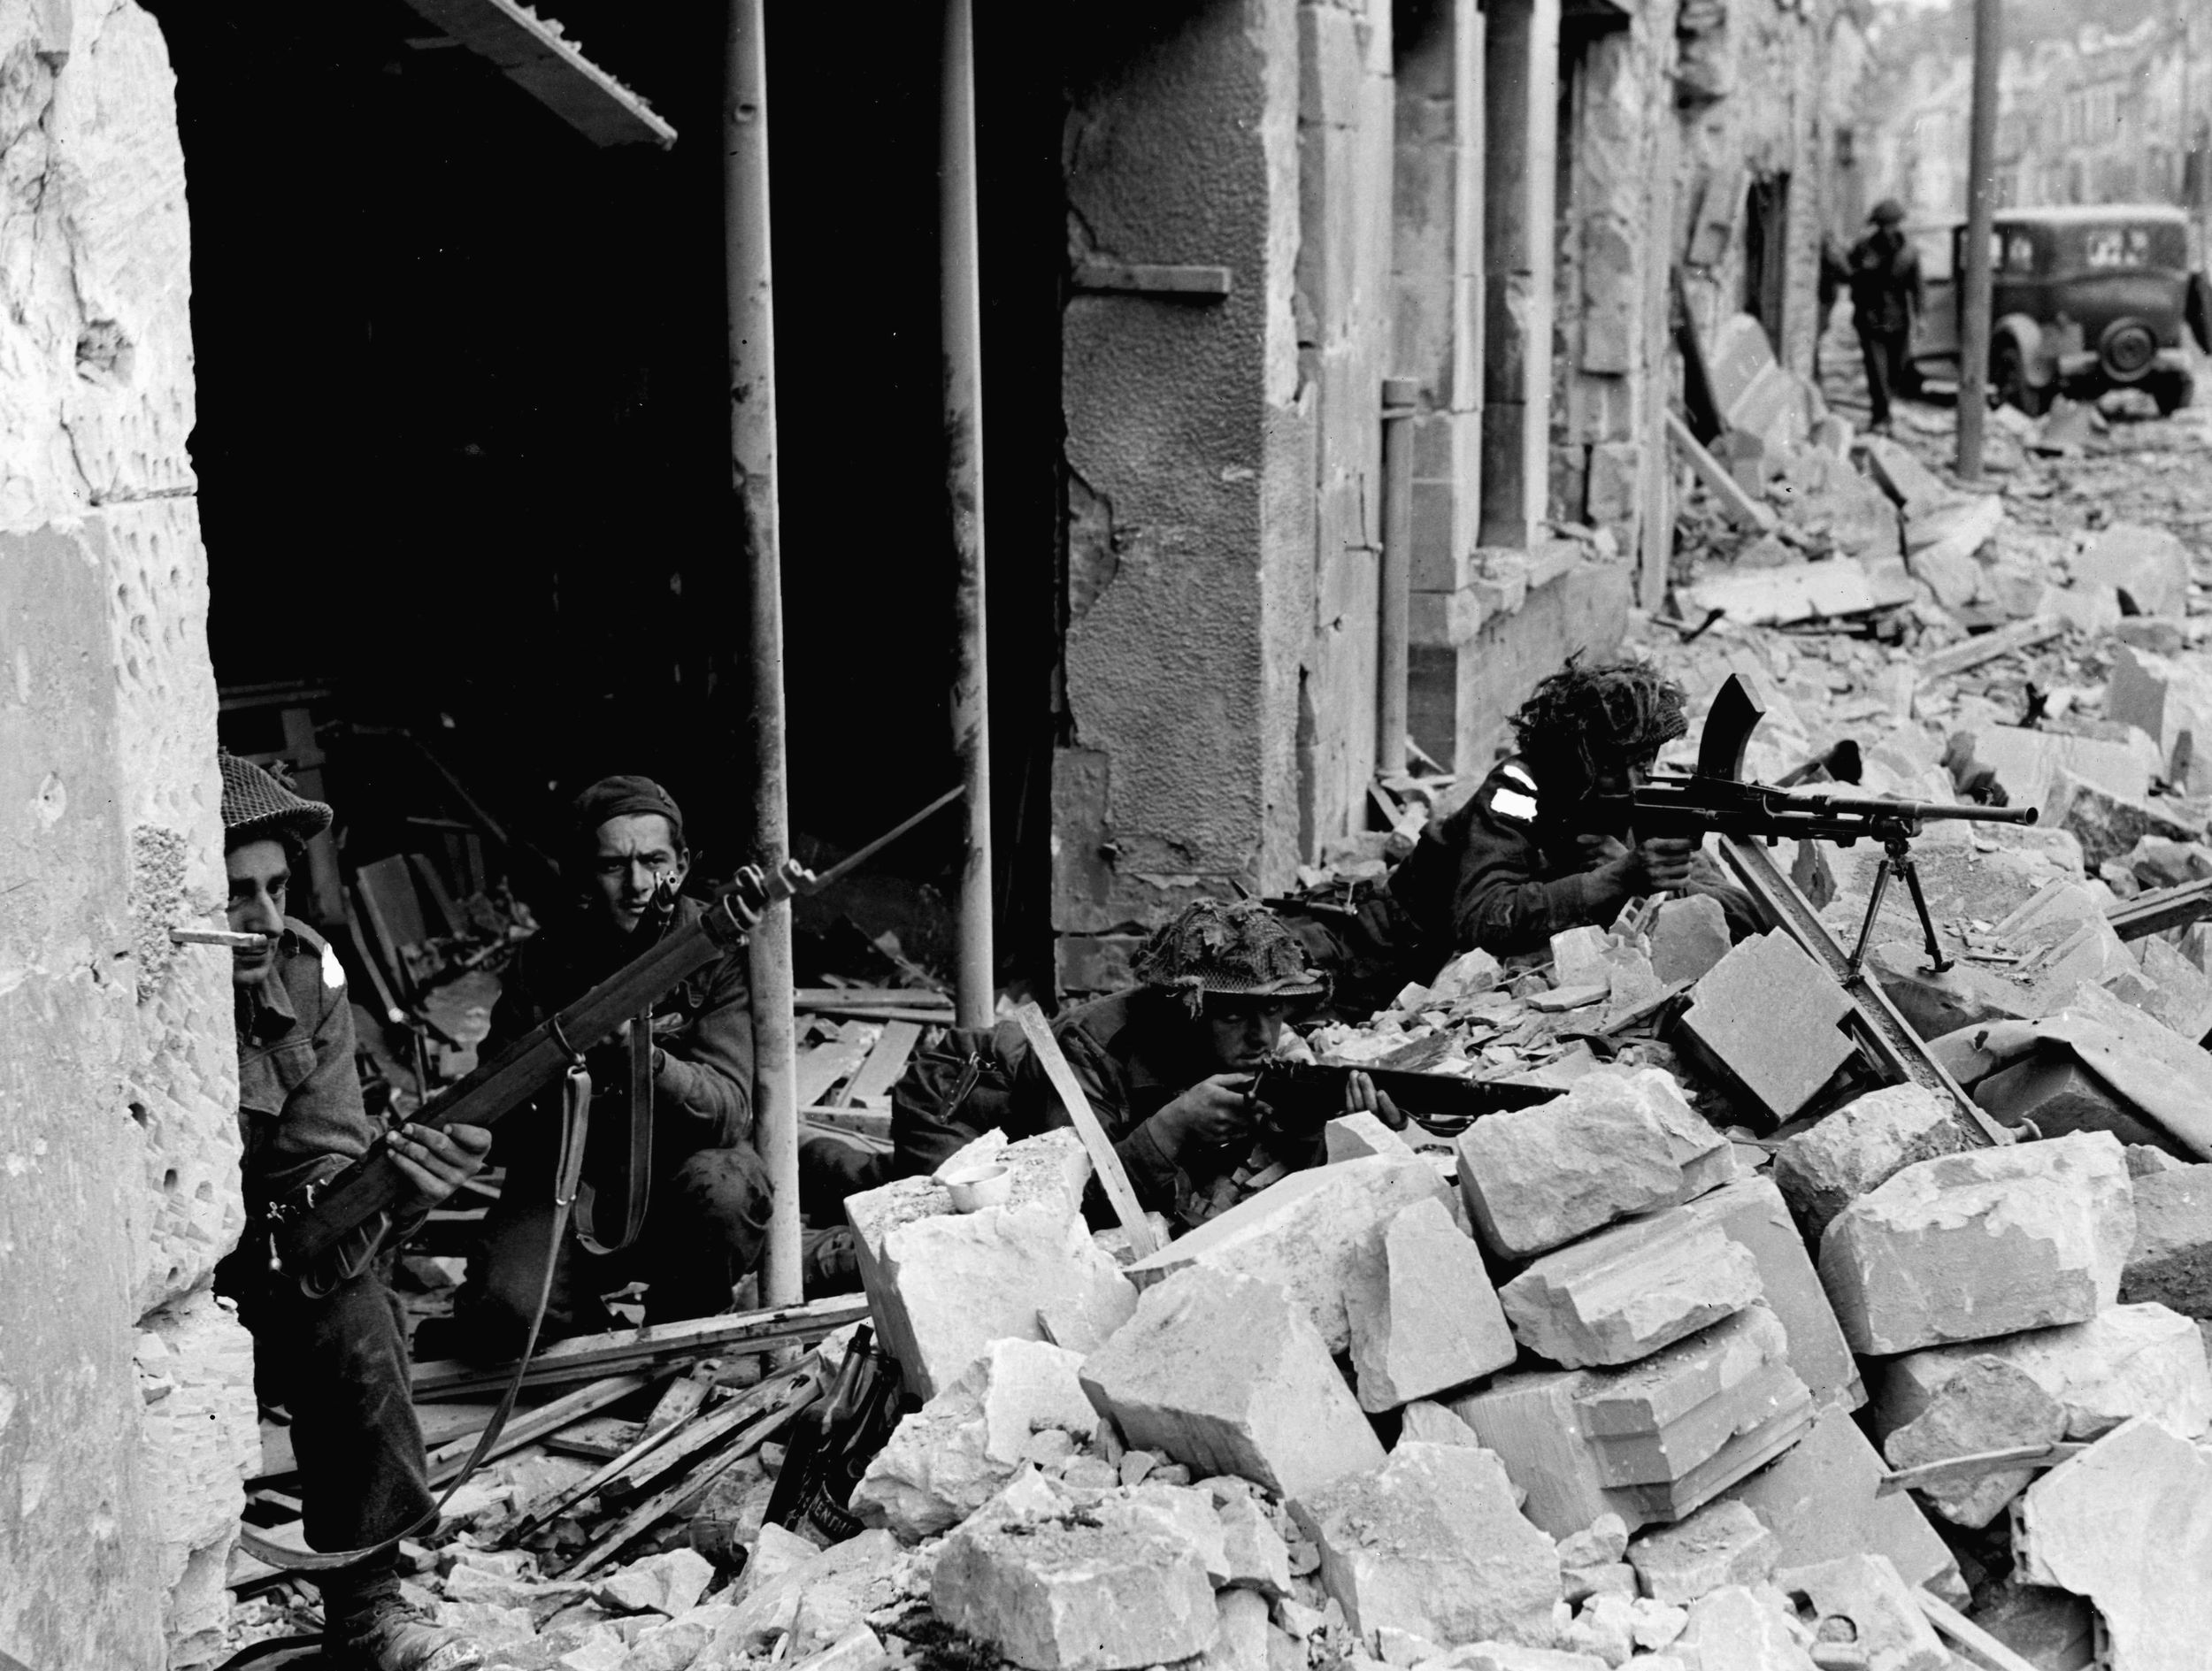 Attempting to pinpoint the locations of German snipers hiding on the upper floors of nearby buildings, Canadian soldiers take cover amid the ruins of the embattled town of Caen. The initial plan for Operation Overlord called for the capture of Caen on D-Day. However, the city remained in German hands for another month. 